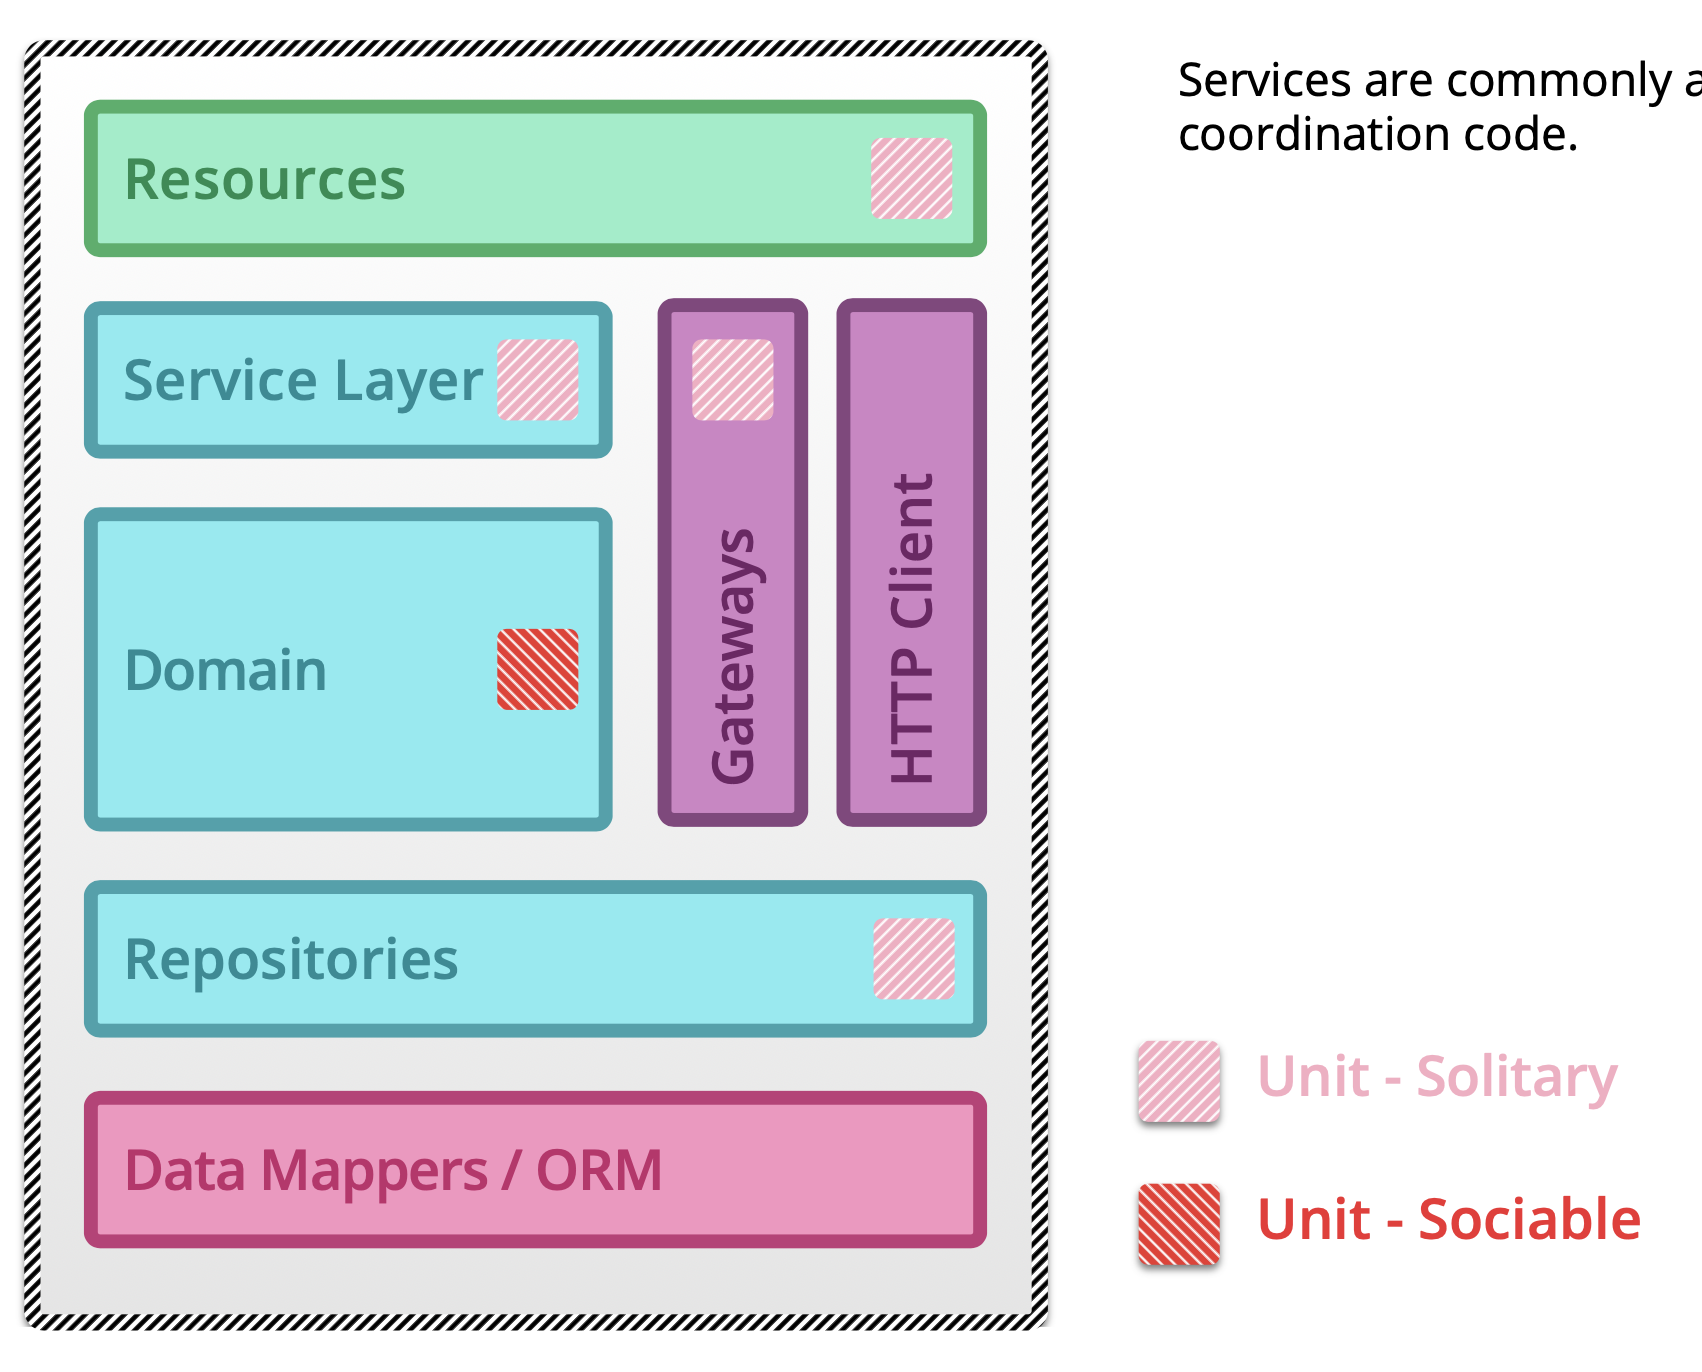 ../../_images/testing-microservices-04.png